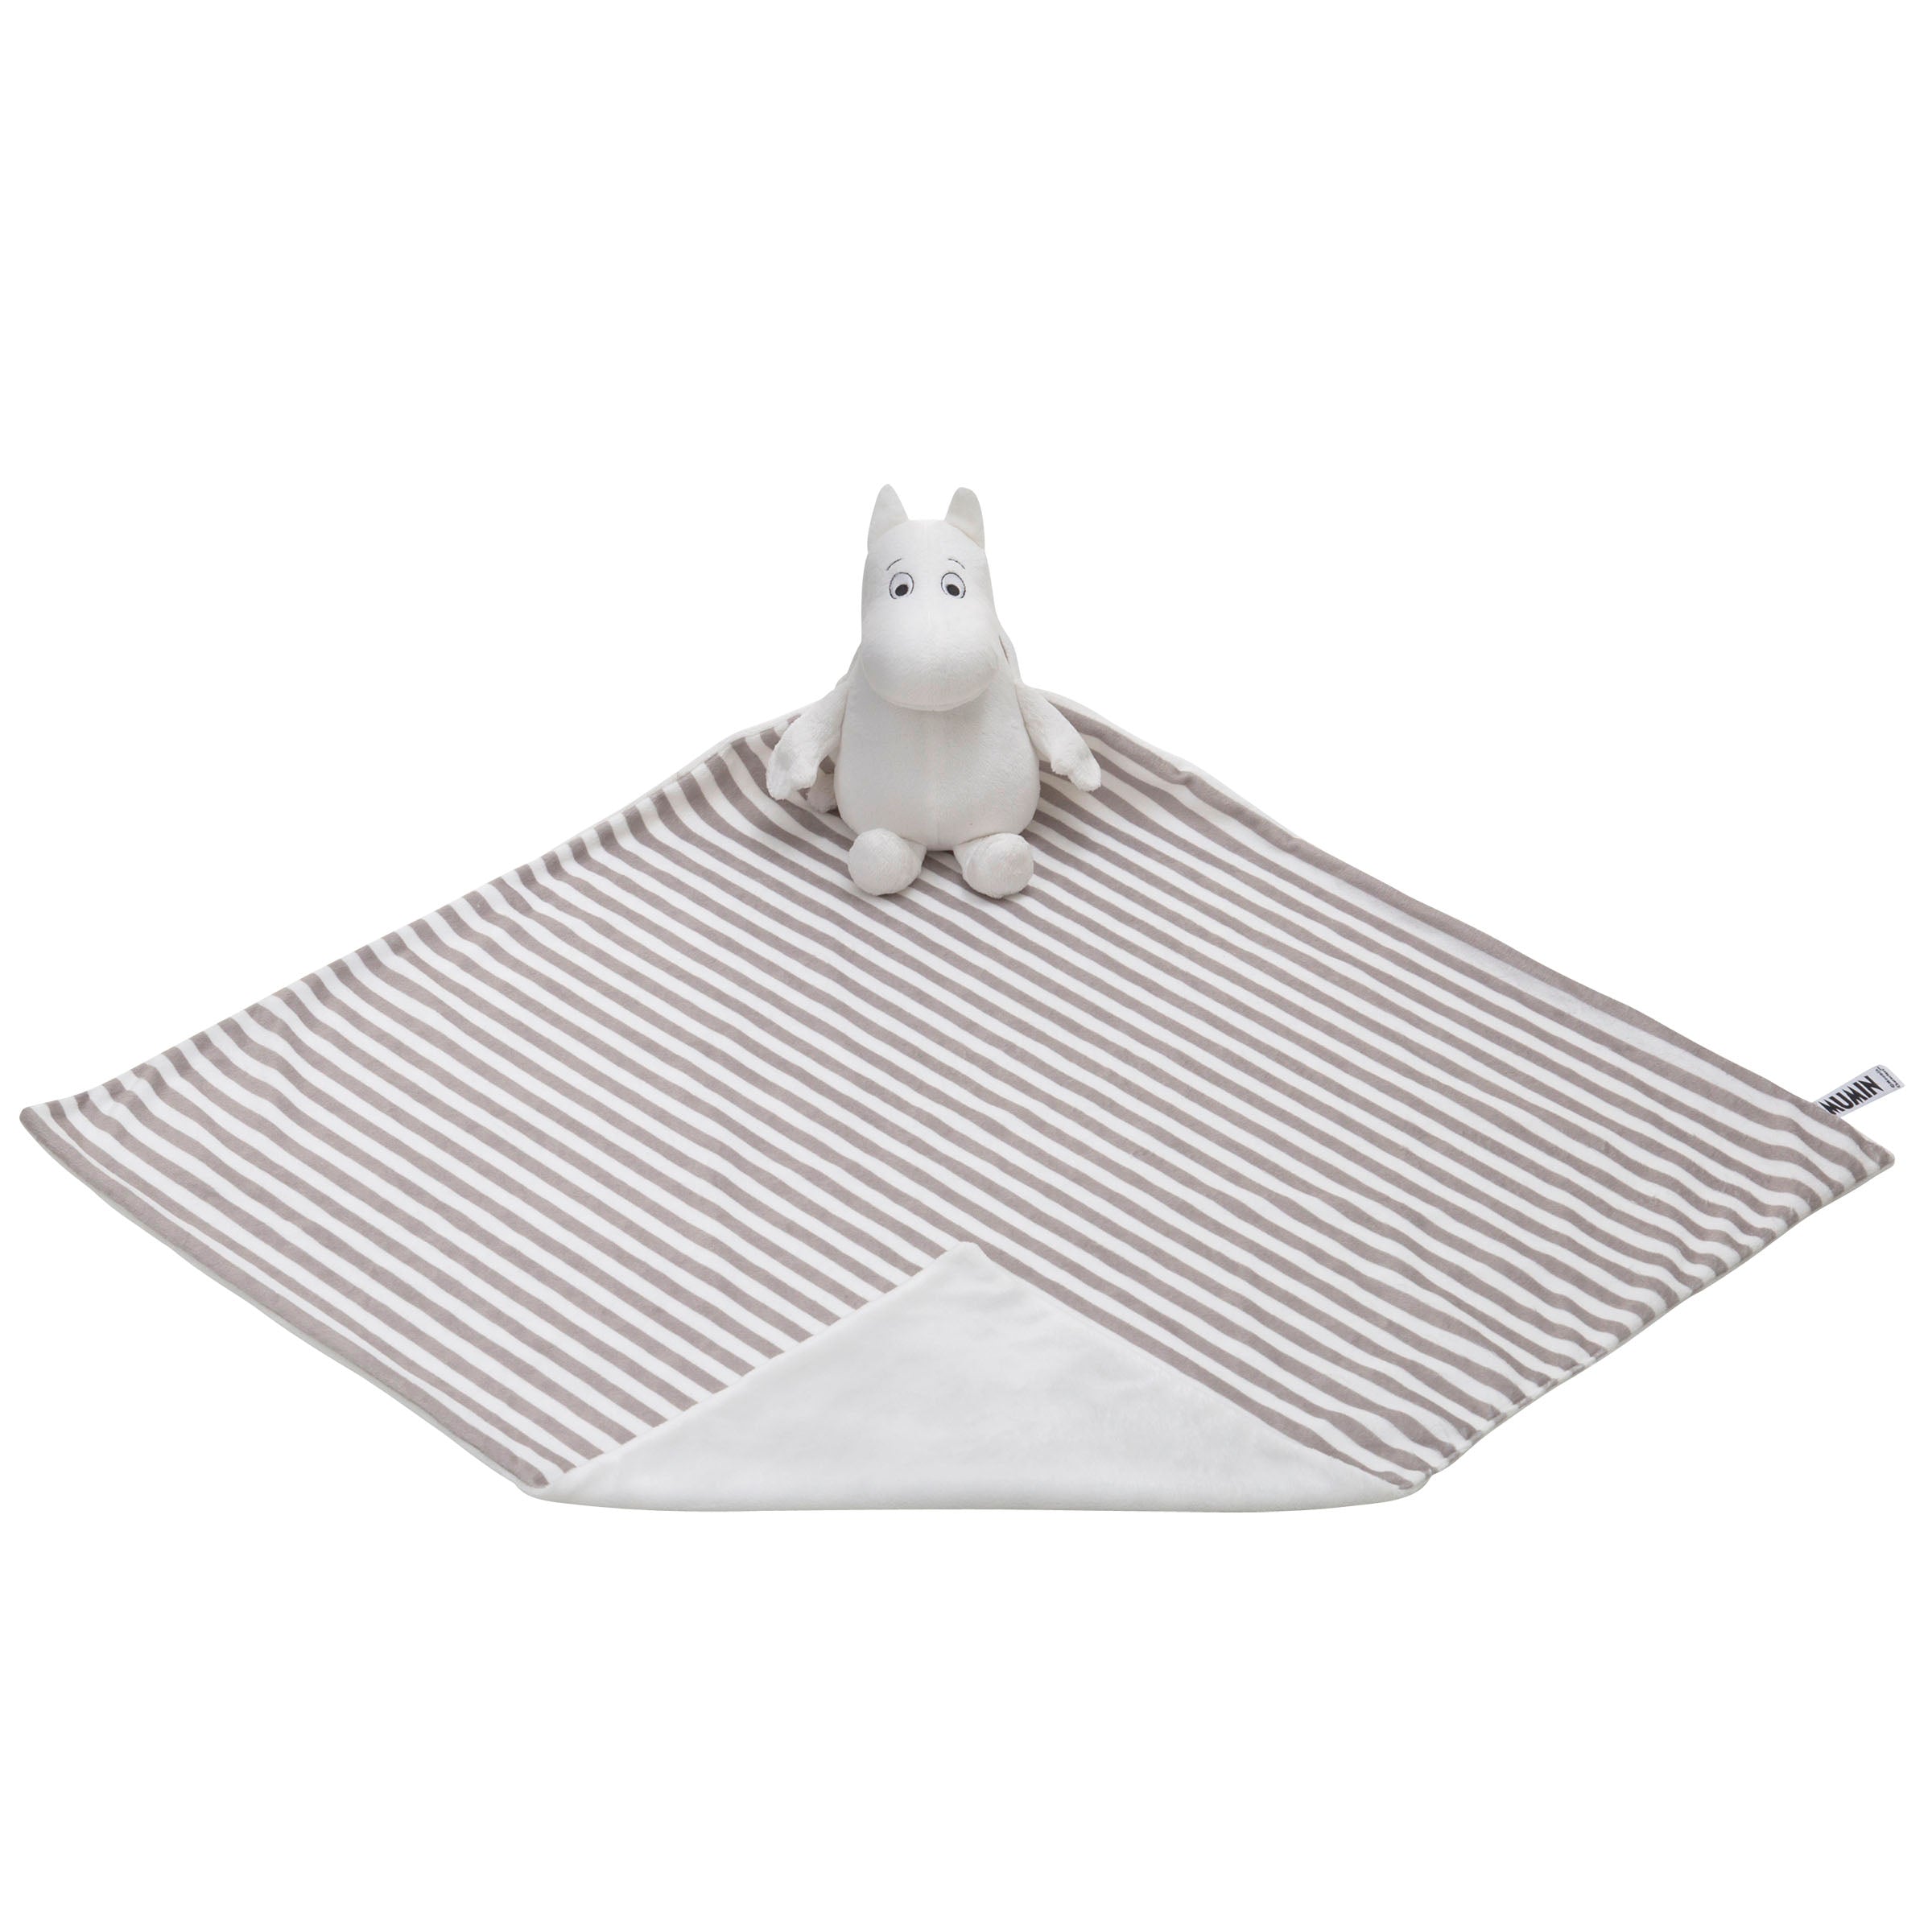 Cuddle blanket XL, with Moomin figure